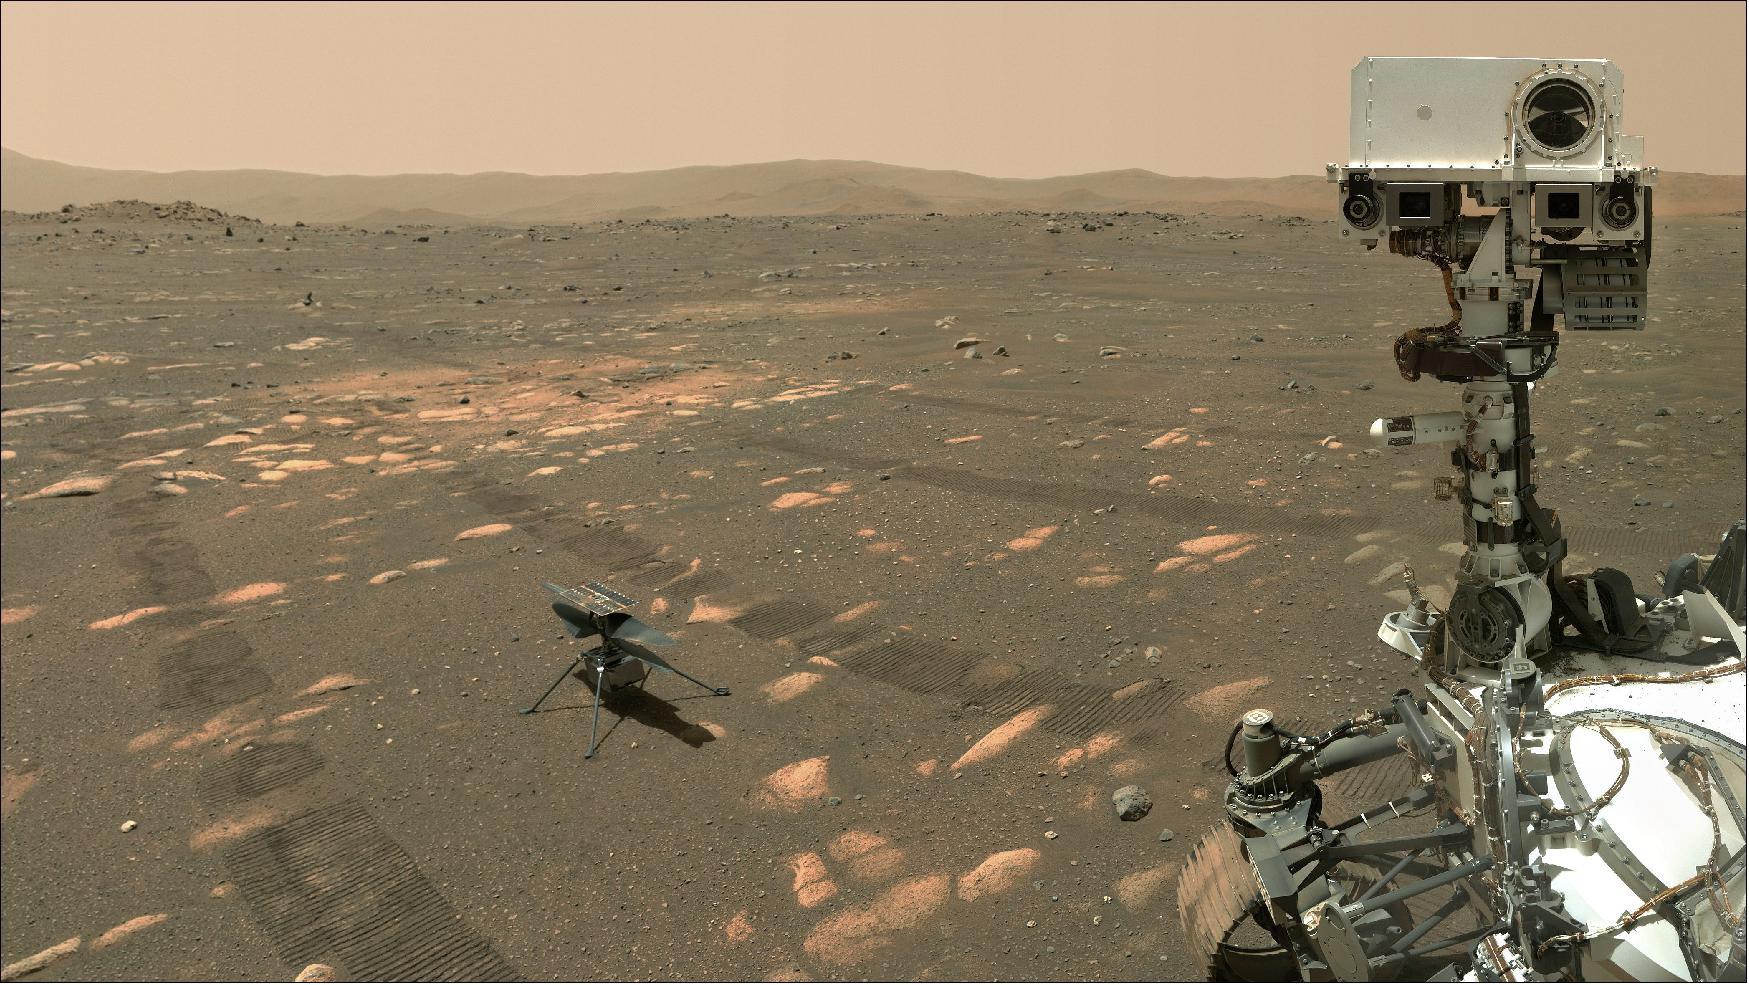 Figure 30: NASA's Perseverance Mars rover took a selfie with the Ingenuity helicopter, seen here about 13 feet (3.9 meters) from the rover in this image taken April 6, 2021, the 46th Martian day, or sol, of the mission by the WATSON (Wide Angle Topographic Sensor for Operations and eNgineering) camera on the SHERLOC (Scanning Habitable Environments with Raman and Luminescence for Organics and Chemicals) instrument, located at the end of the rover's long robotic arm (image credits: NASA/JPL-Caltech/MSSS)